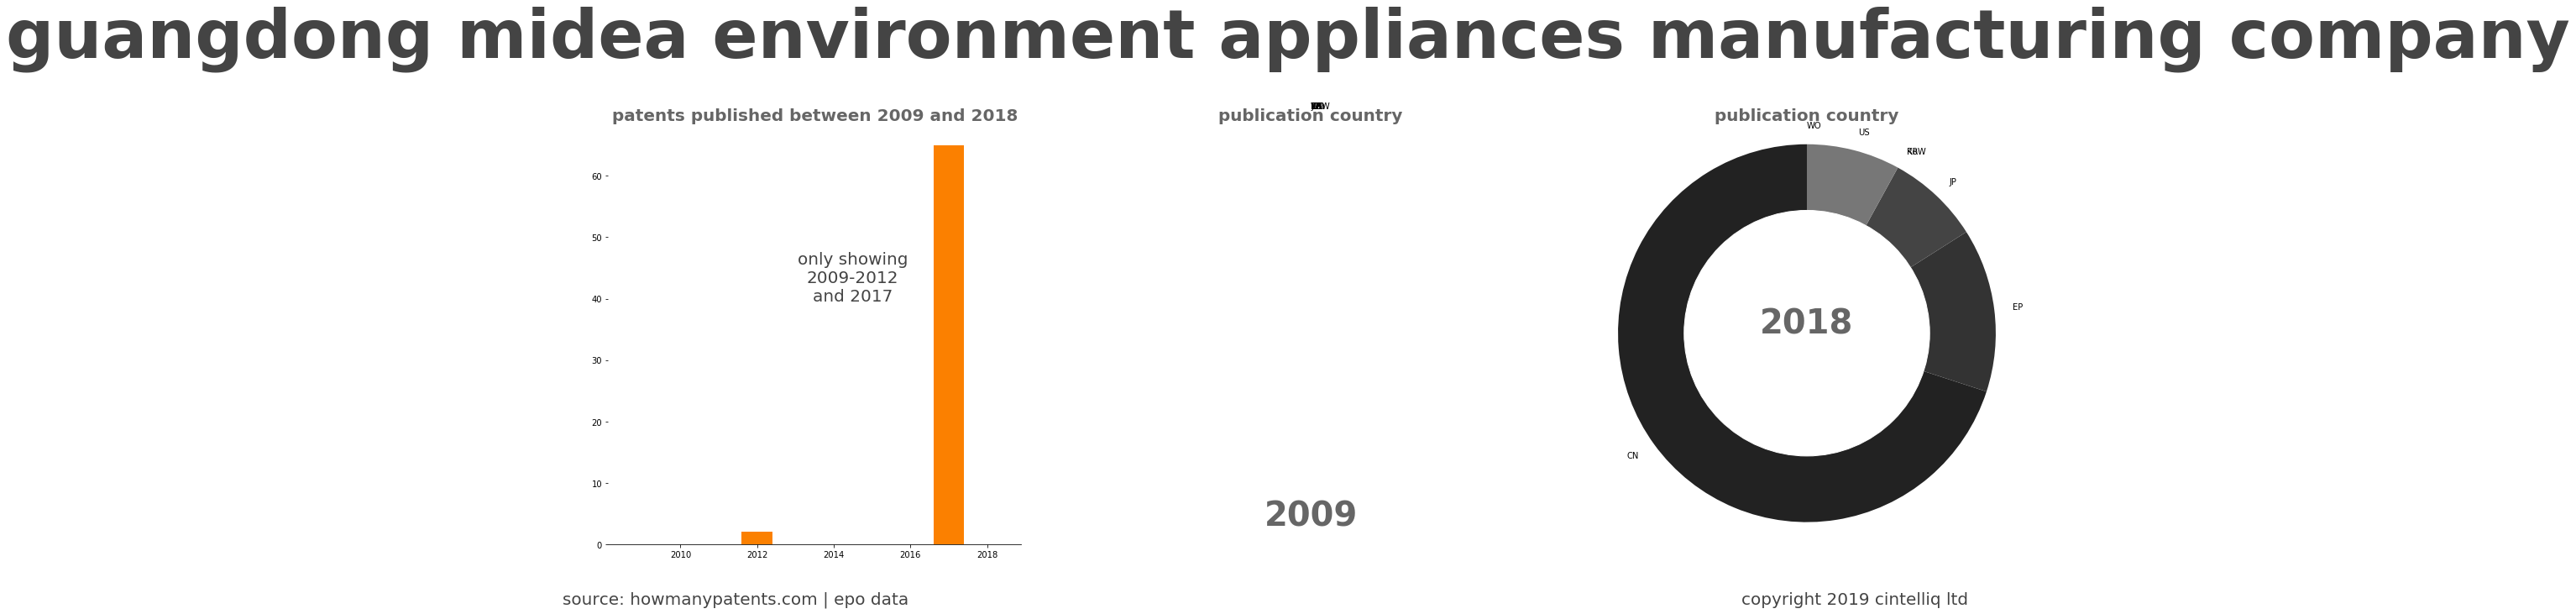 summary of patents for Guangdong Midea Environment Appliances Manufacturing Company